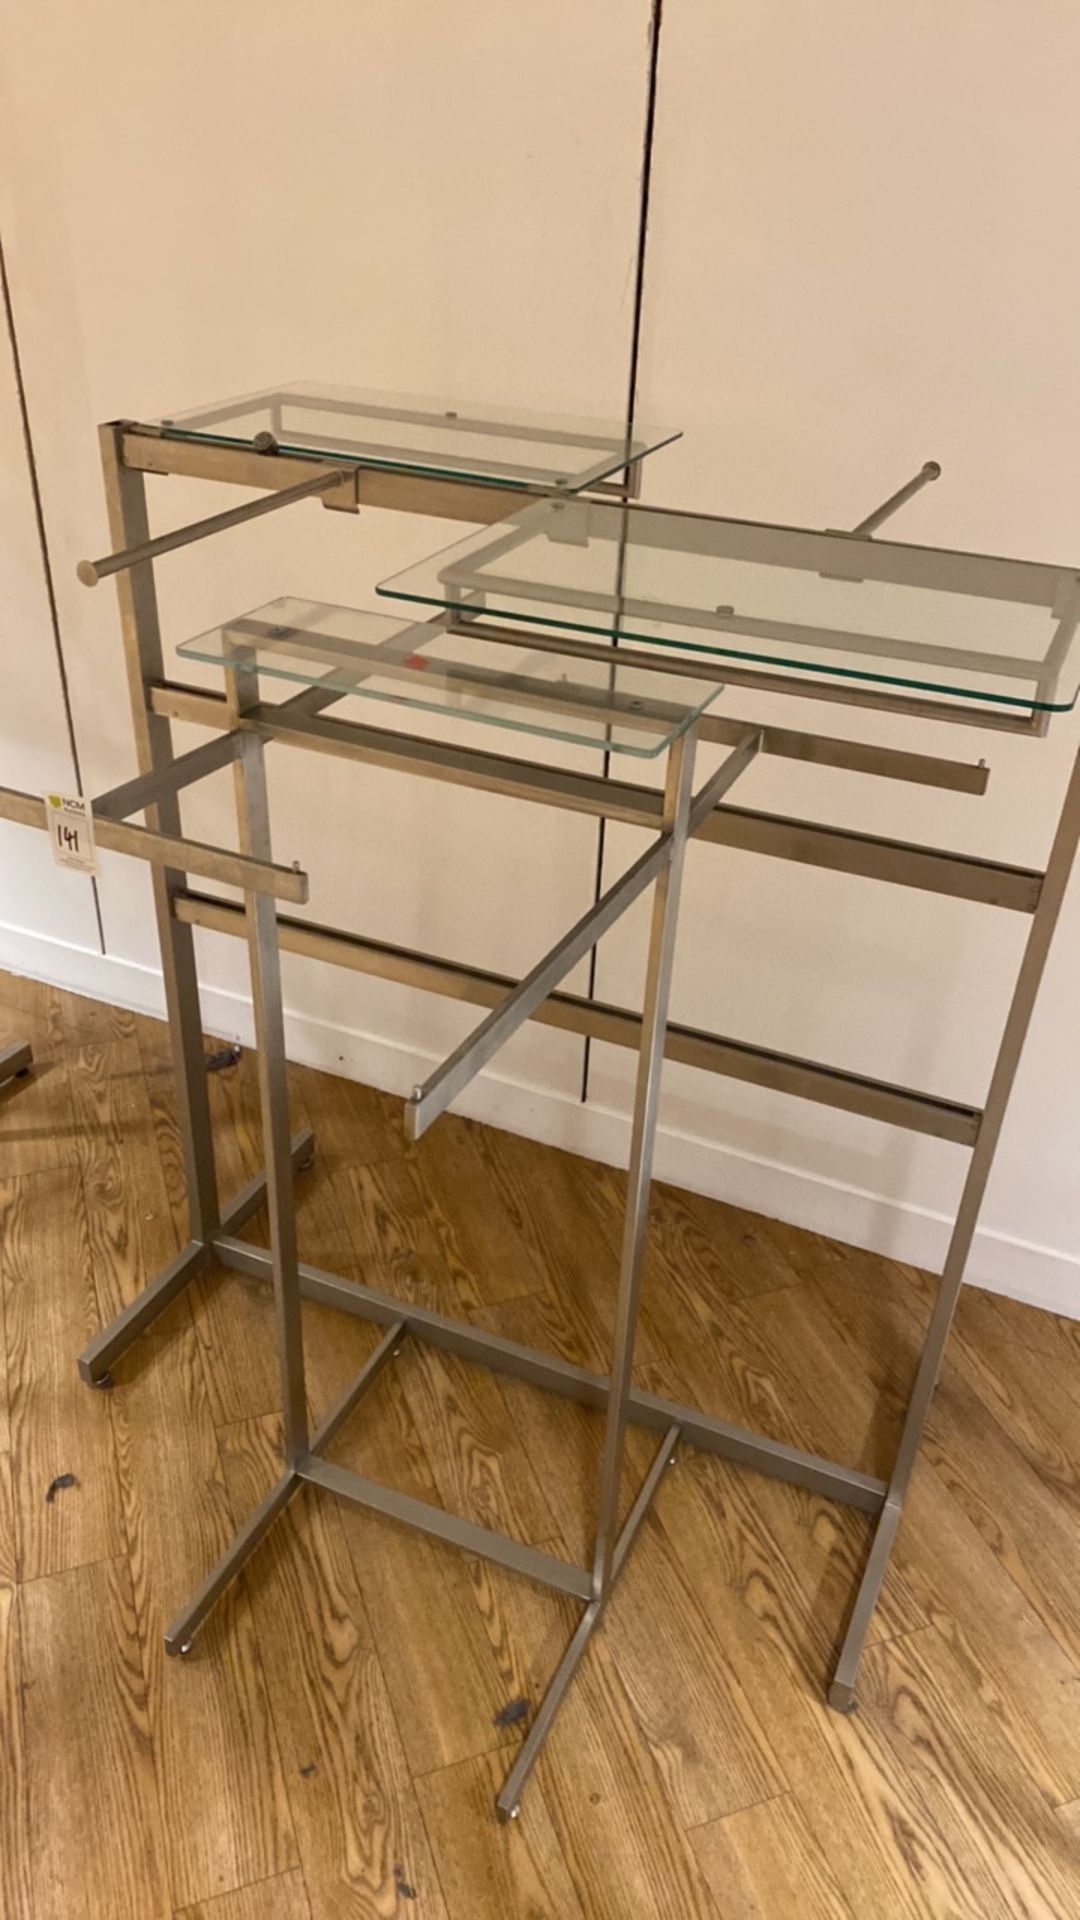 Free standing Clothing Rails X2 - Image 3 of 3